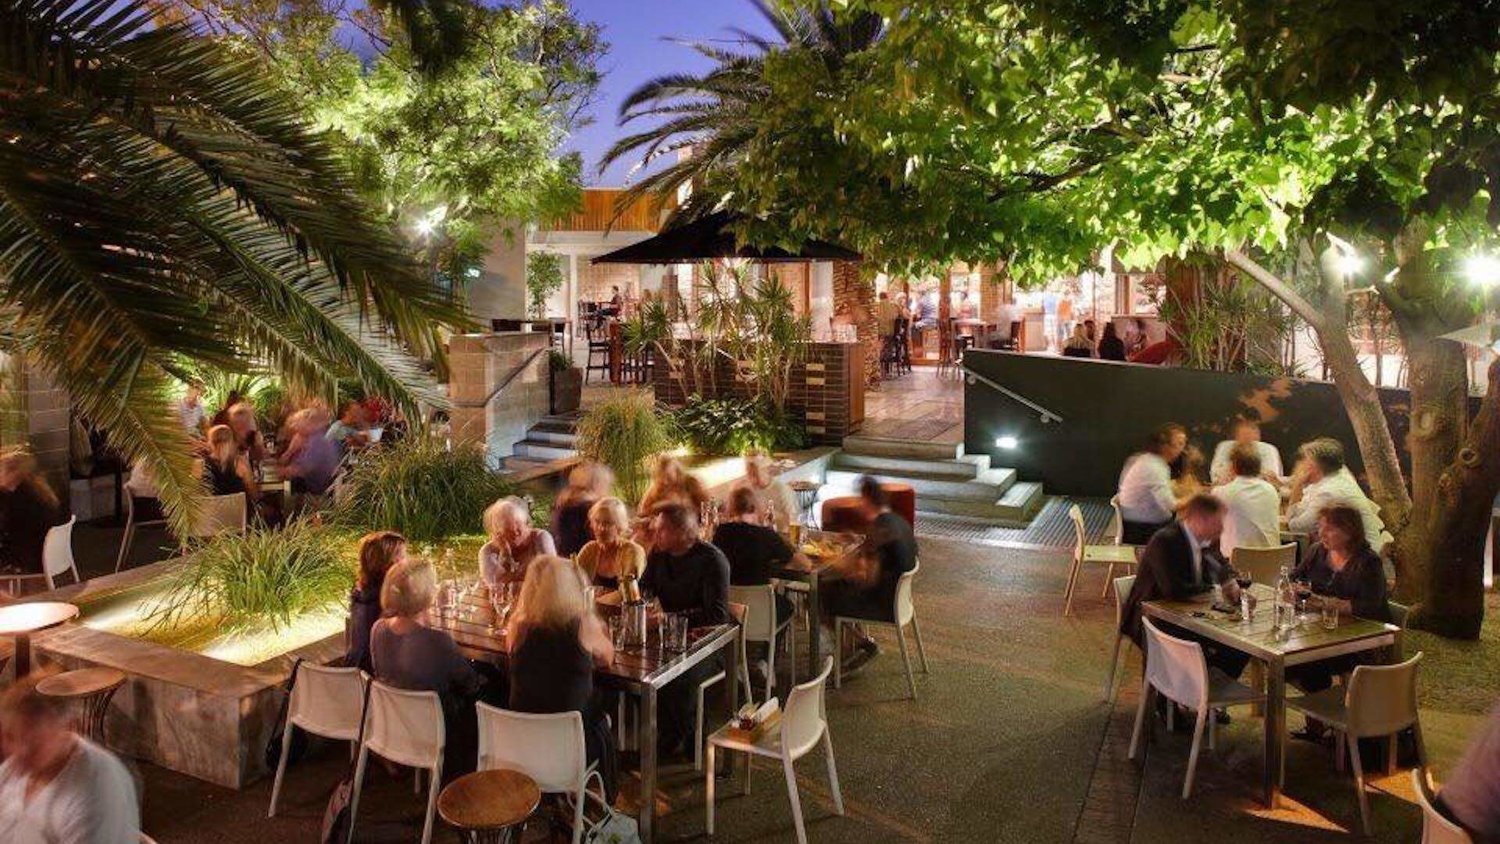 The Brisbane Hotel, Laid-back pub with a palm-filled beer garden, comedy upstairs and a menu of modern comfort food, 292 Beaufort St, Perth WA 6003